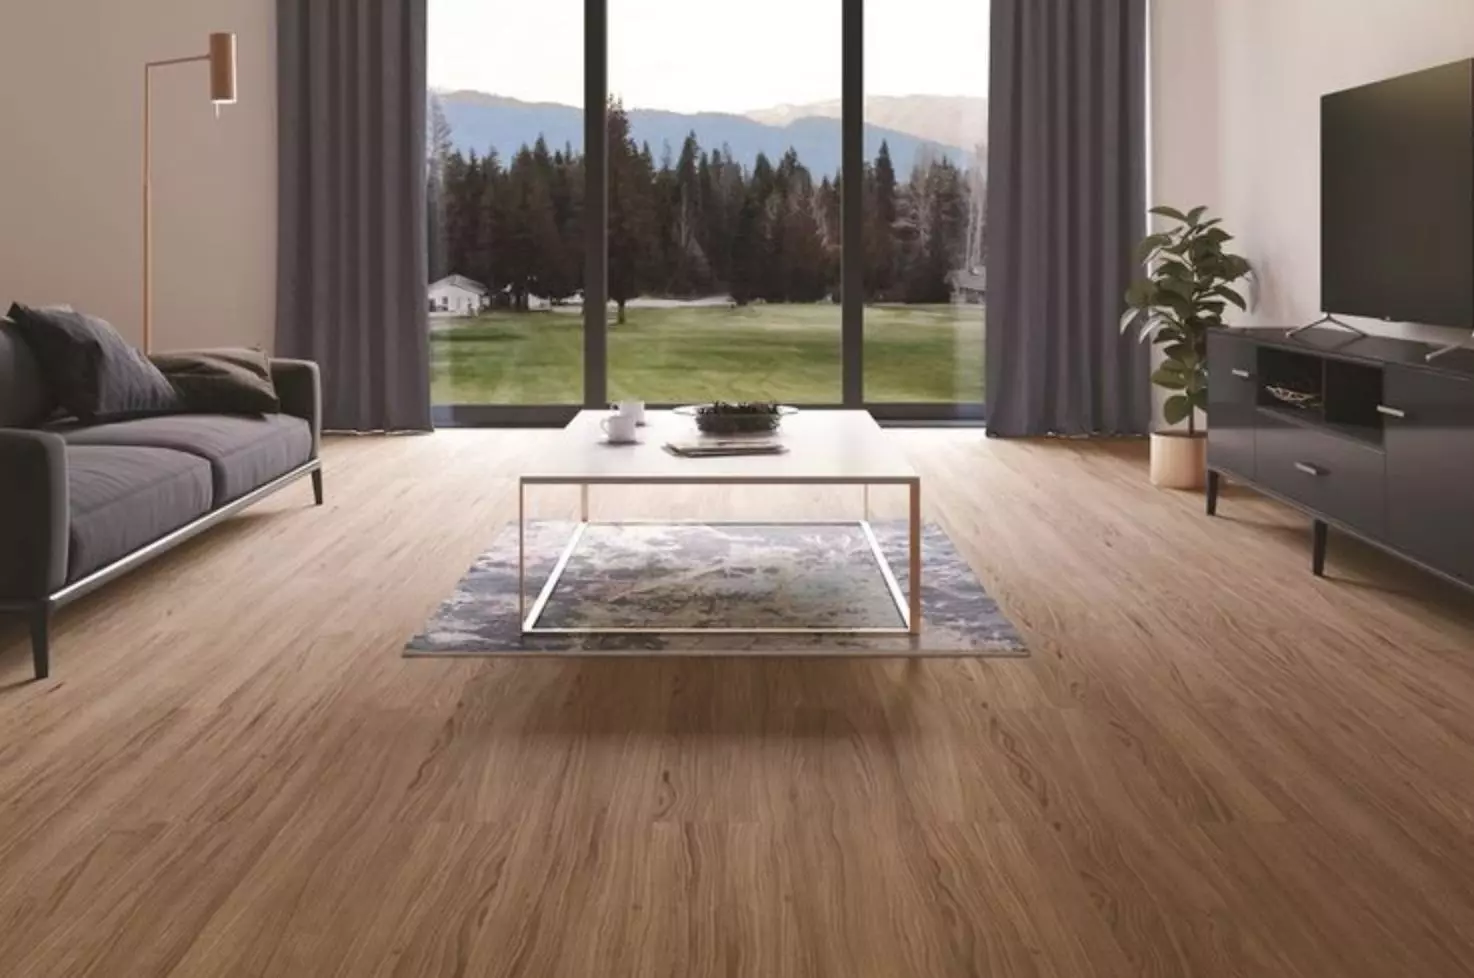 Why Choose LVT Floors For Your Home?